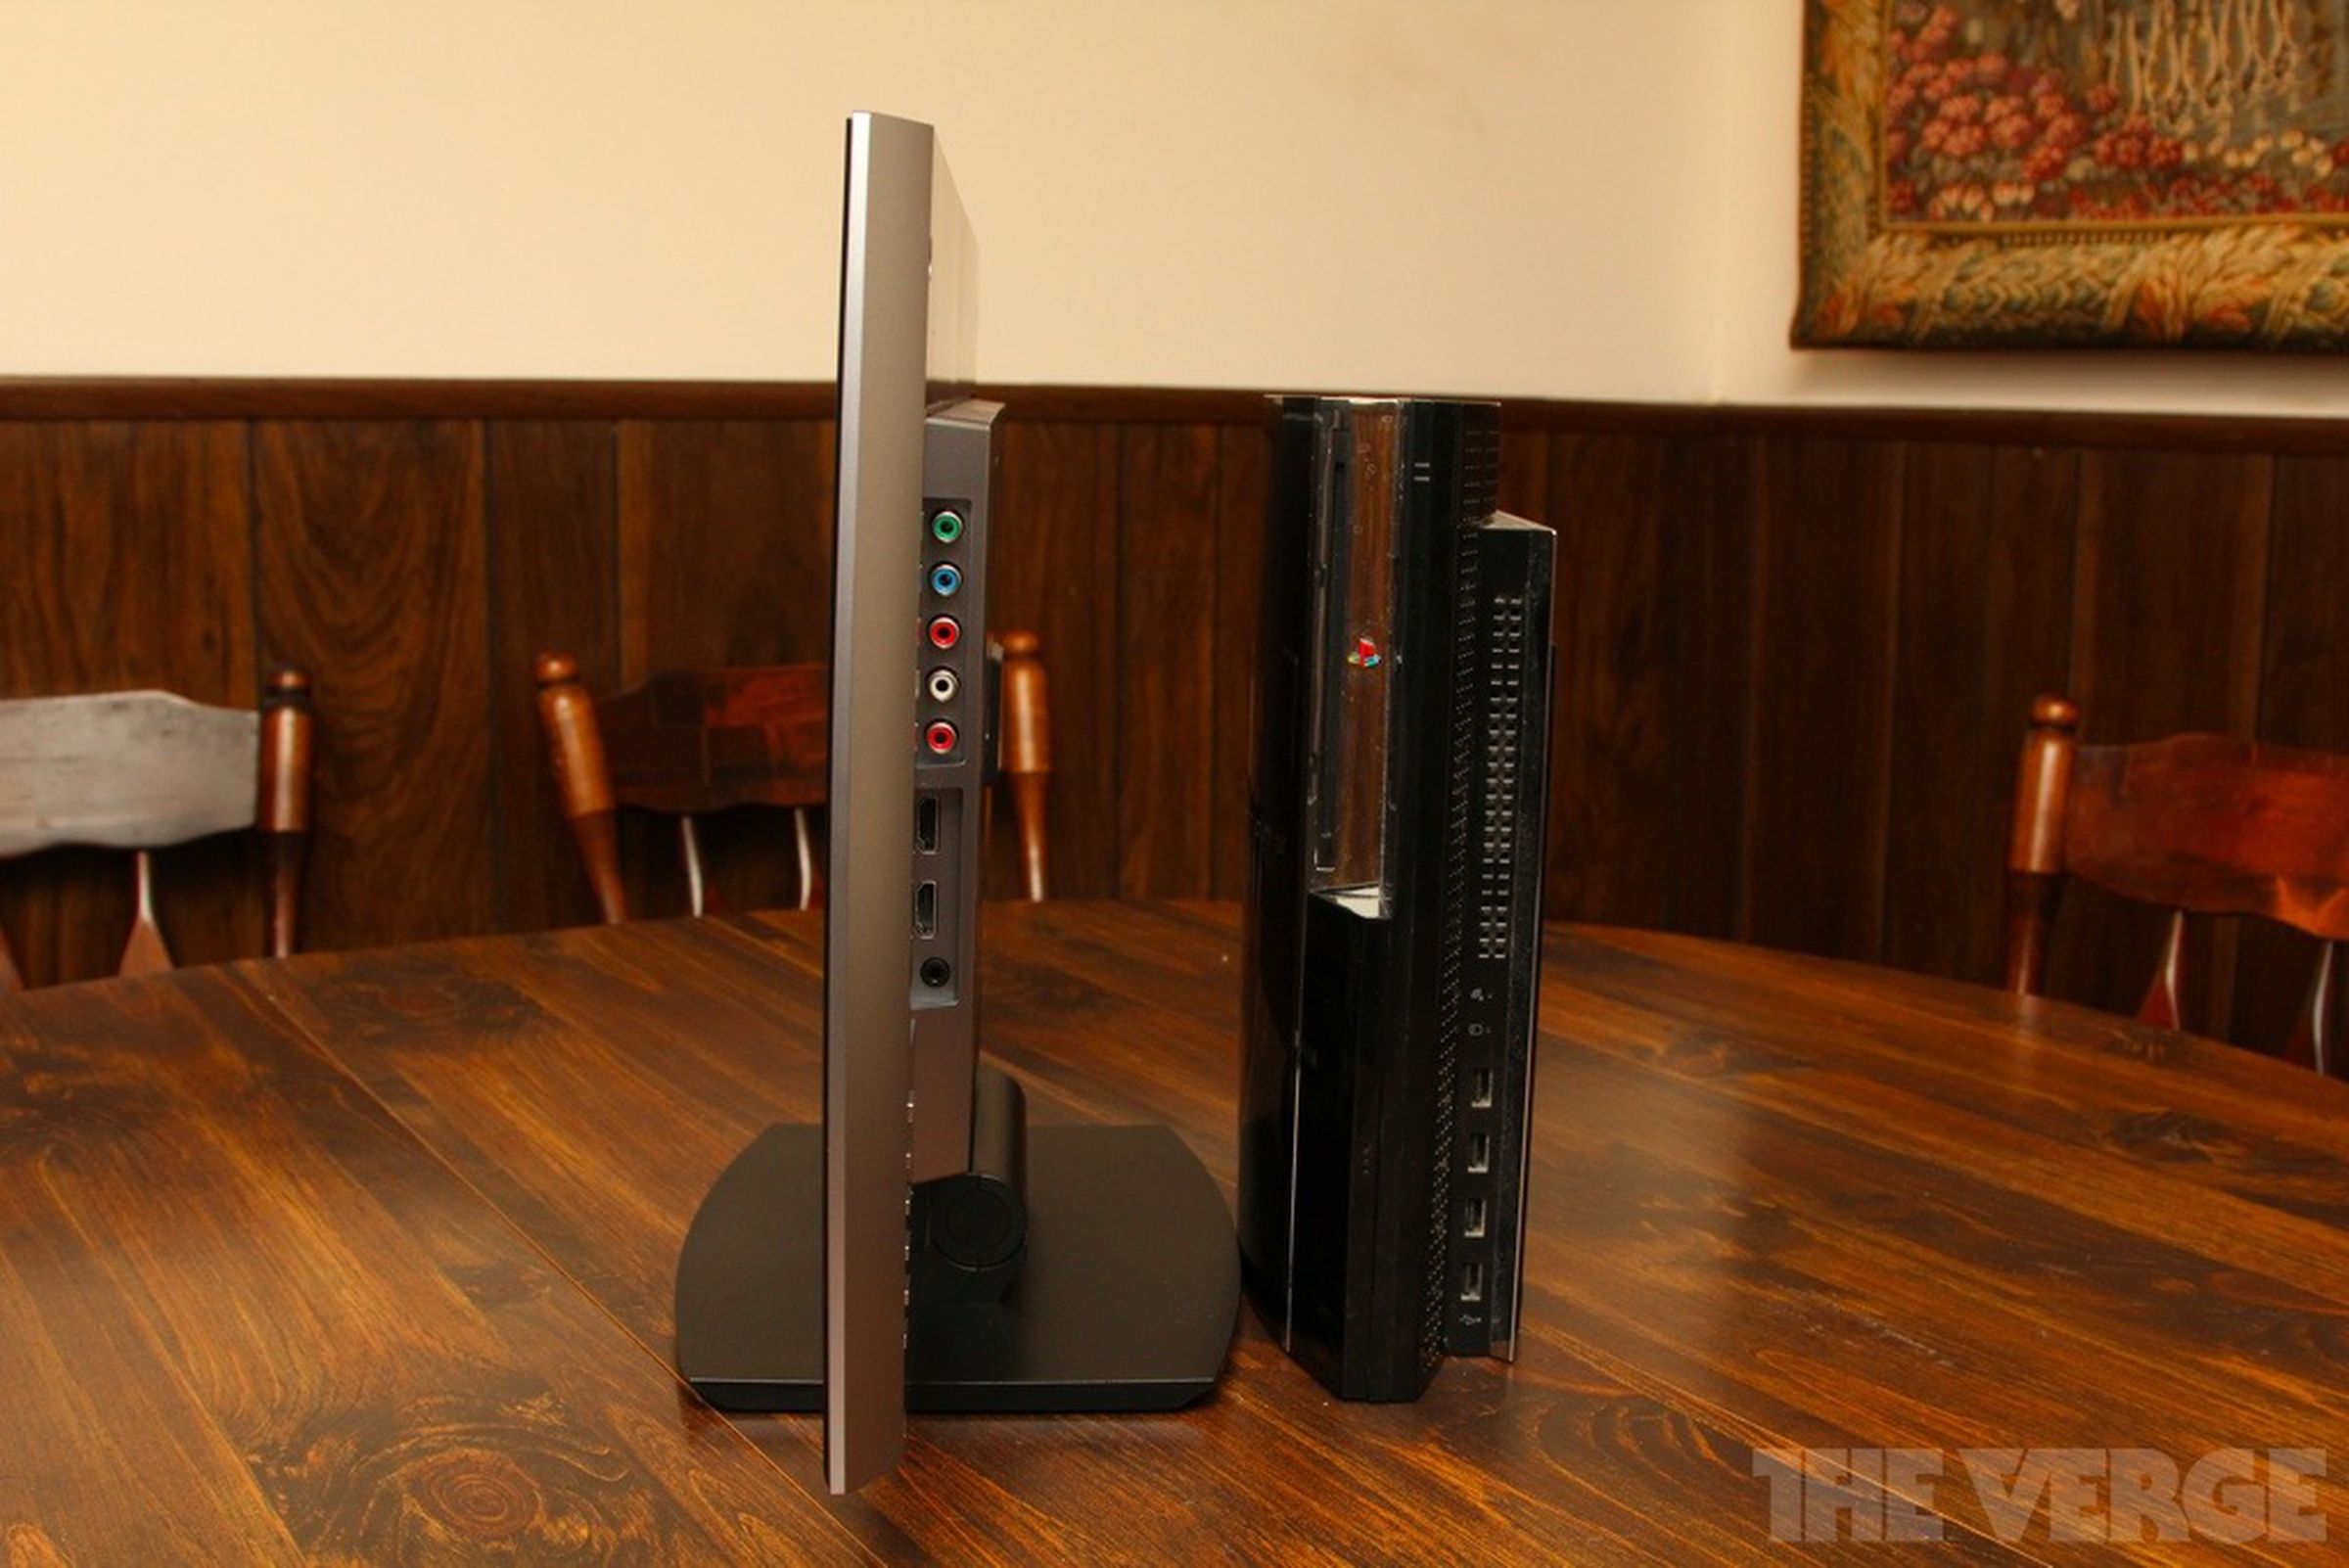 Sony PlayStation 3D Display review pictures